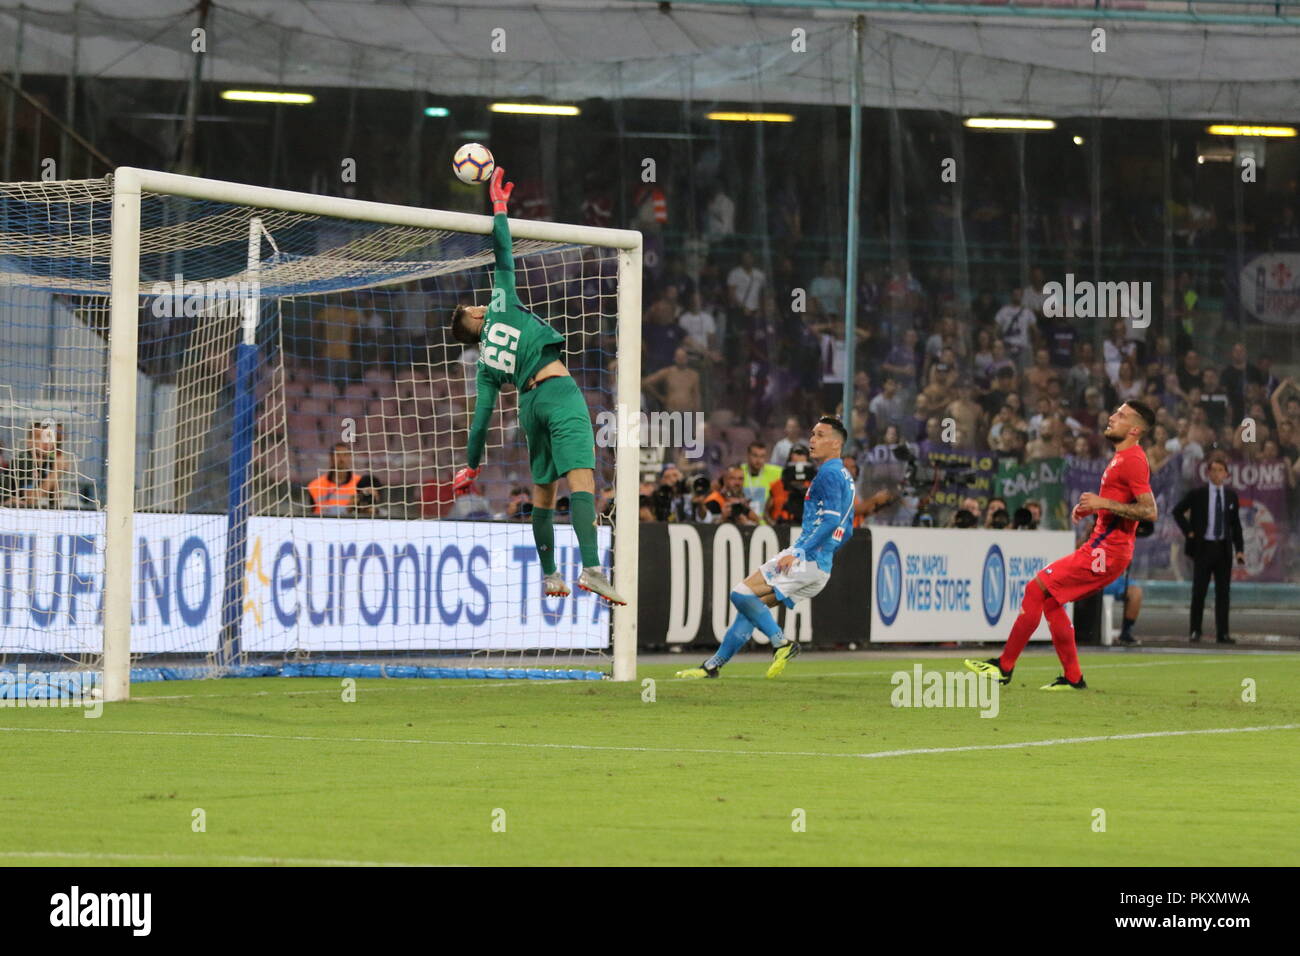 Naples, Italy. 15th September 2018. In the picture the Florentine goalkeeper Dragowski denies the goal to Napoli with a splendid save.Stadium San Paolo Naples. 15th Sep, 2018. 09/15/2018 - Italy.final result SSC Napoli 1 AC Fiorentina 0. Credit: Fabio Sasso/ZUMA Wire/Alamy Live News Stock Photo